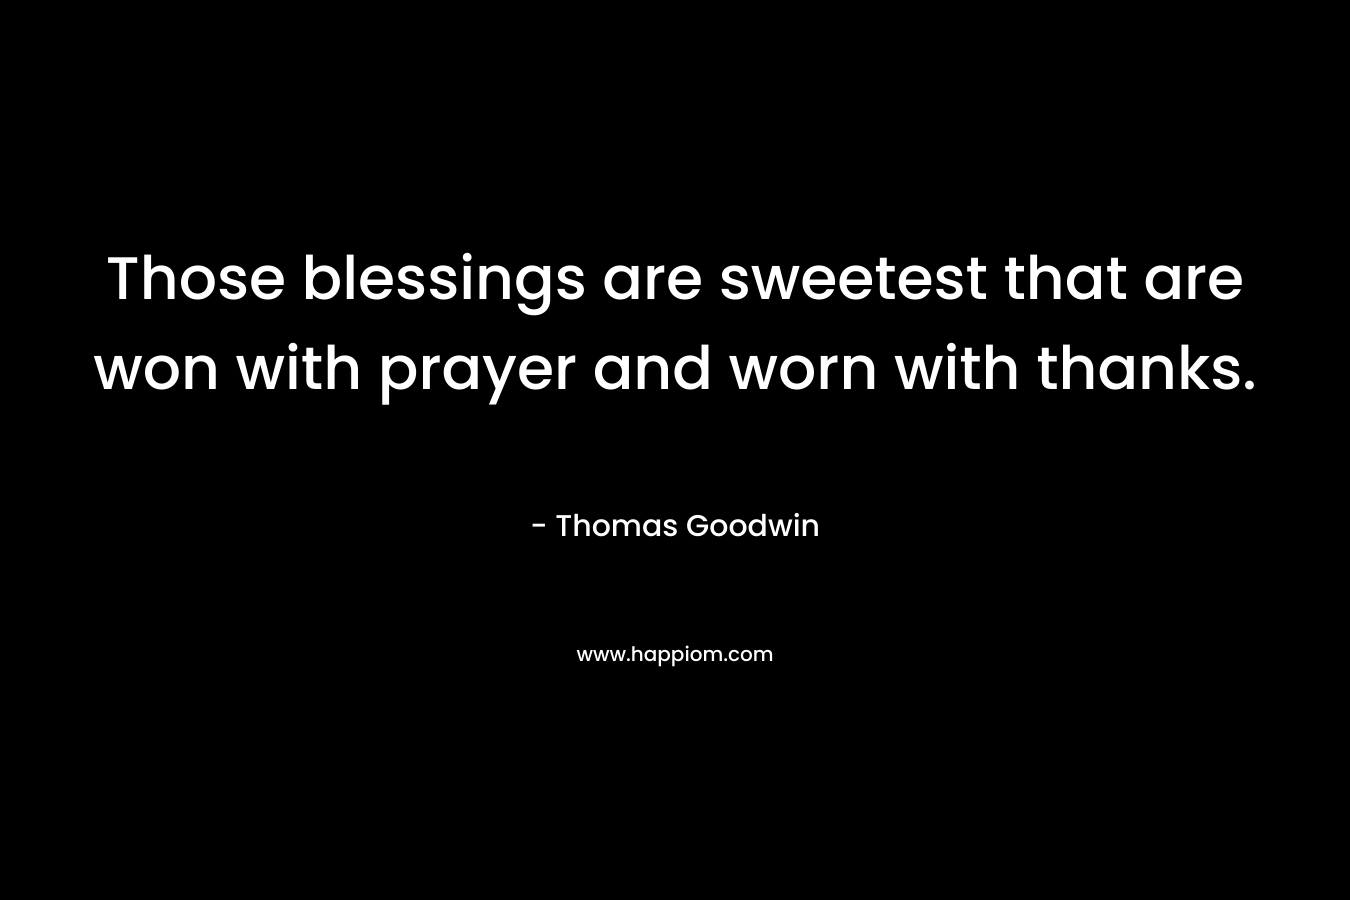 Those blessings are sweetest that are won with prayer and worn with thanks. – Thomas Goodwin